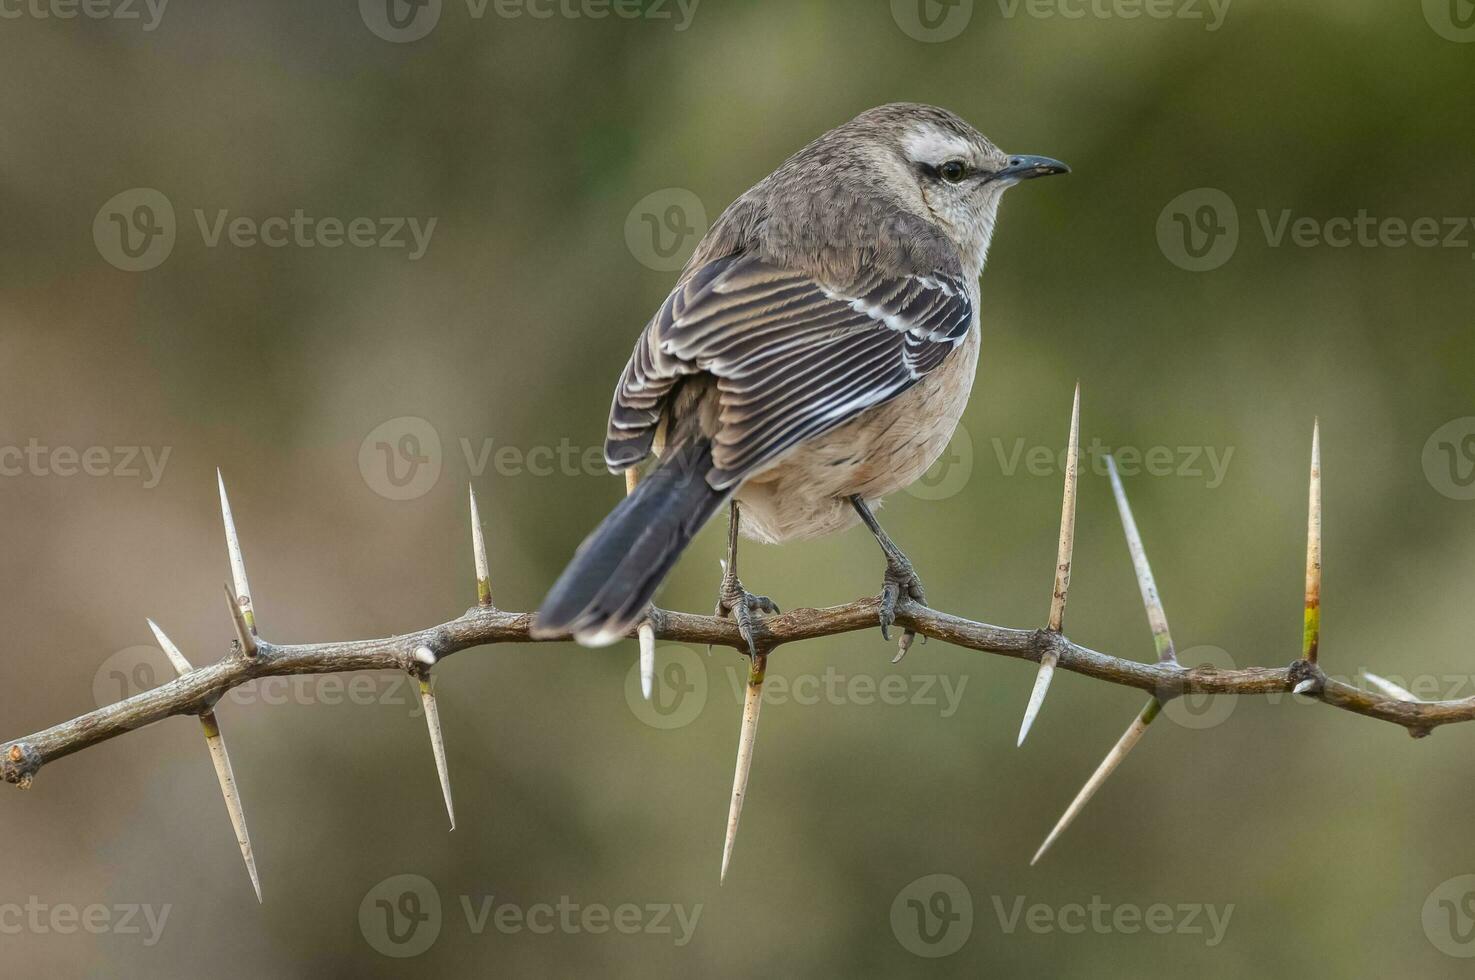 White banded mokingbird in Calden Forest environment, Patagonia forest, Argentina. photo